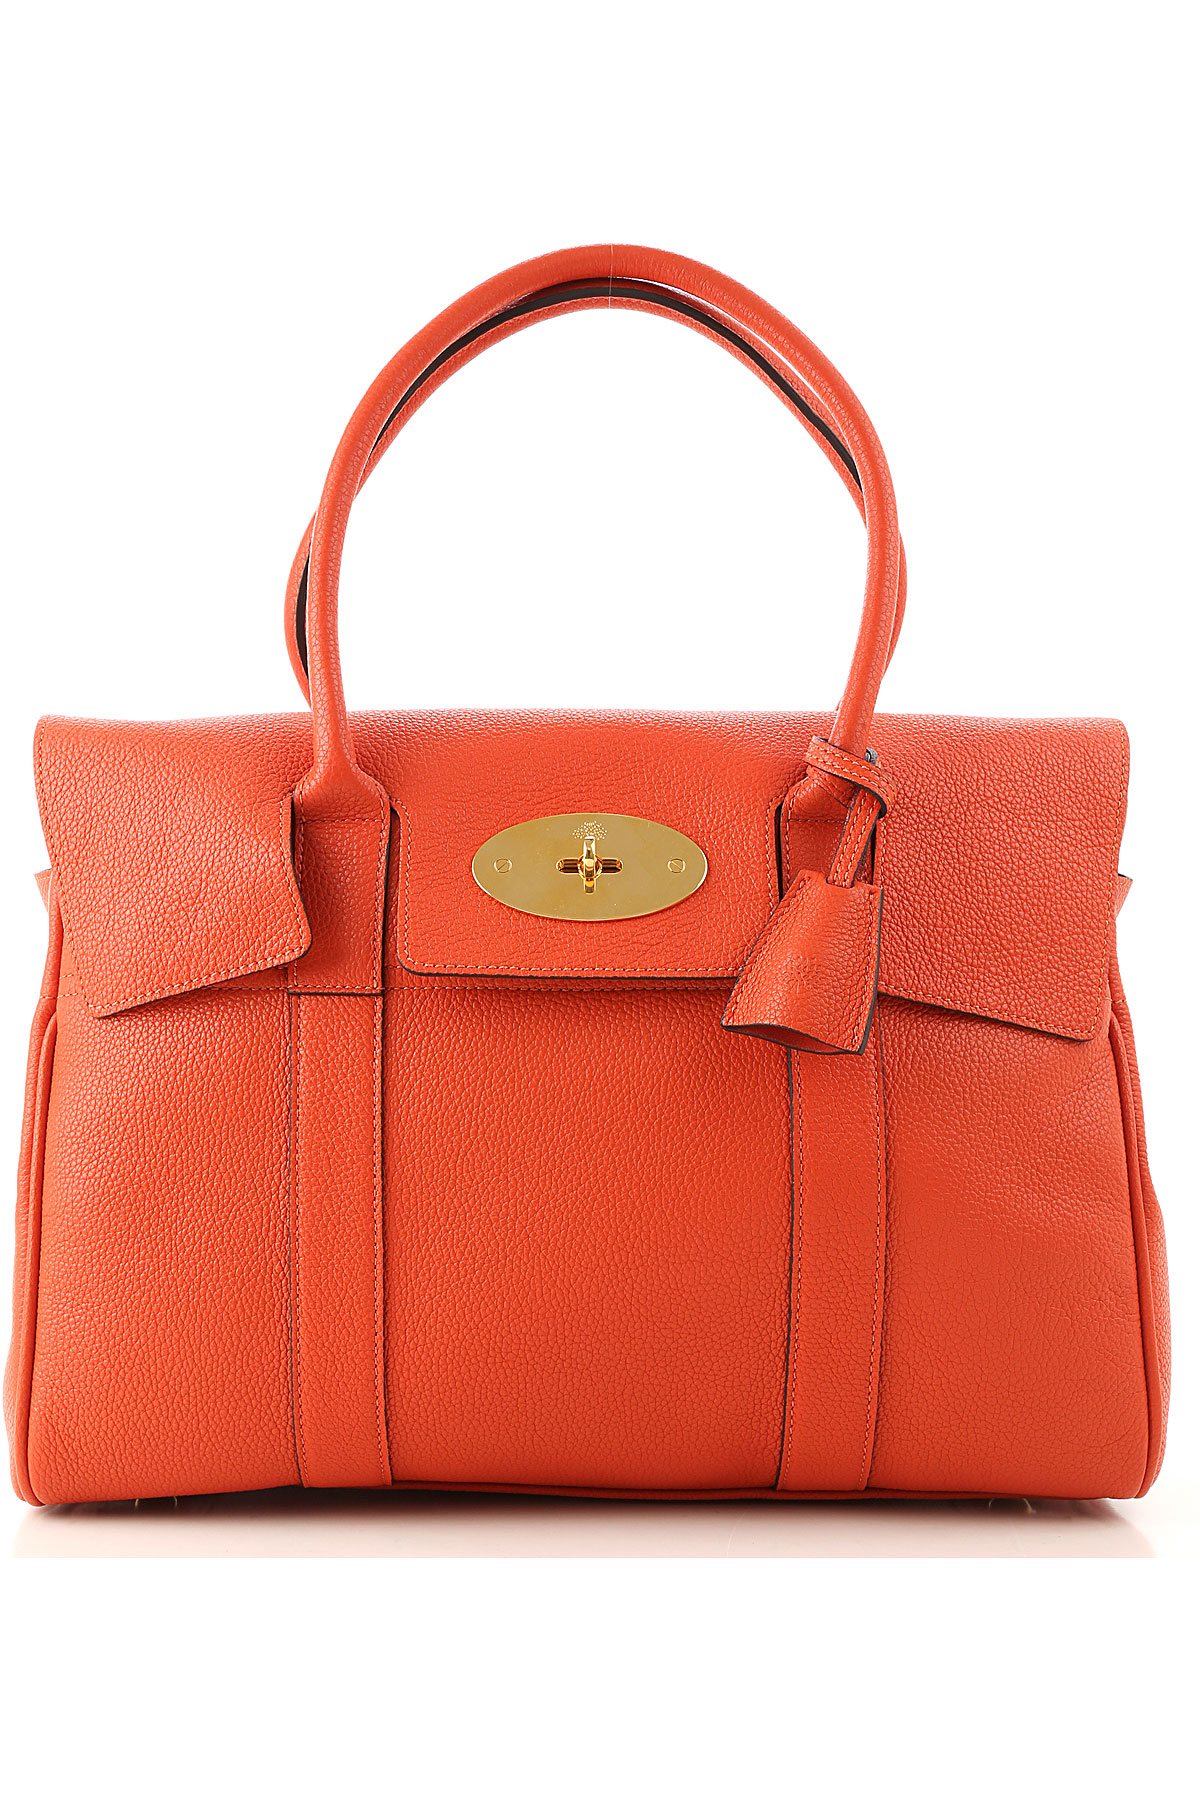 Handbags Mulberry, Style code: hh2873205-n657-